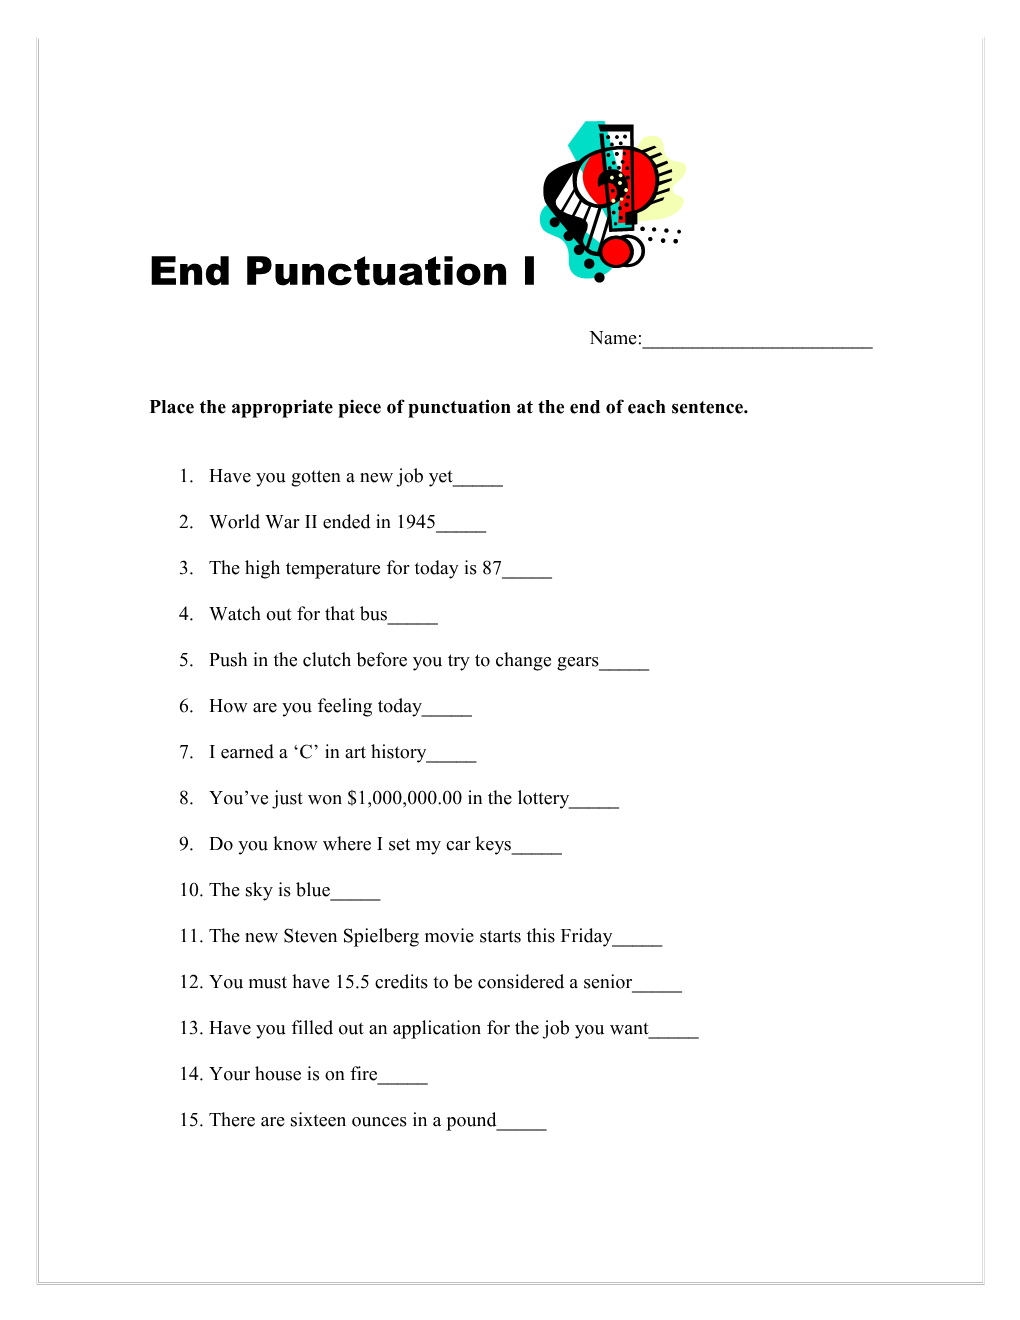 Place the Appropriate Piece of Punctuation at the End of Each Sentence